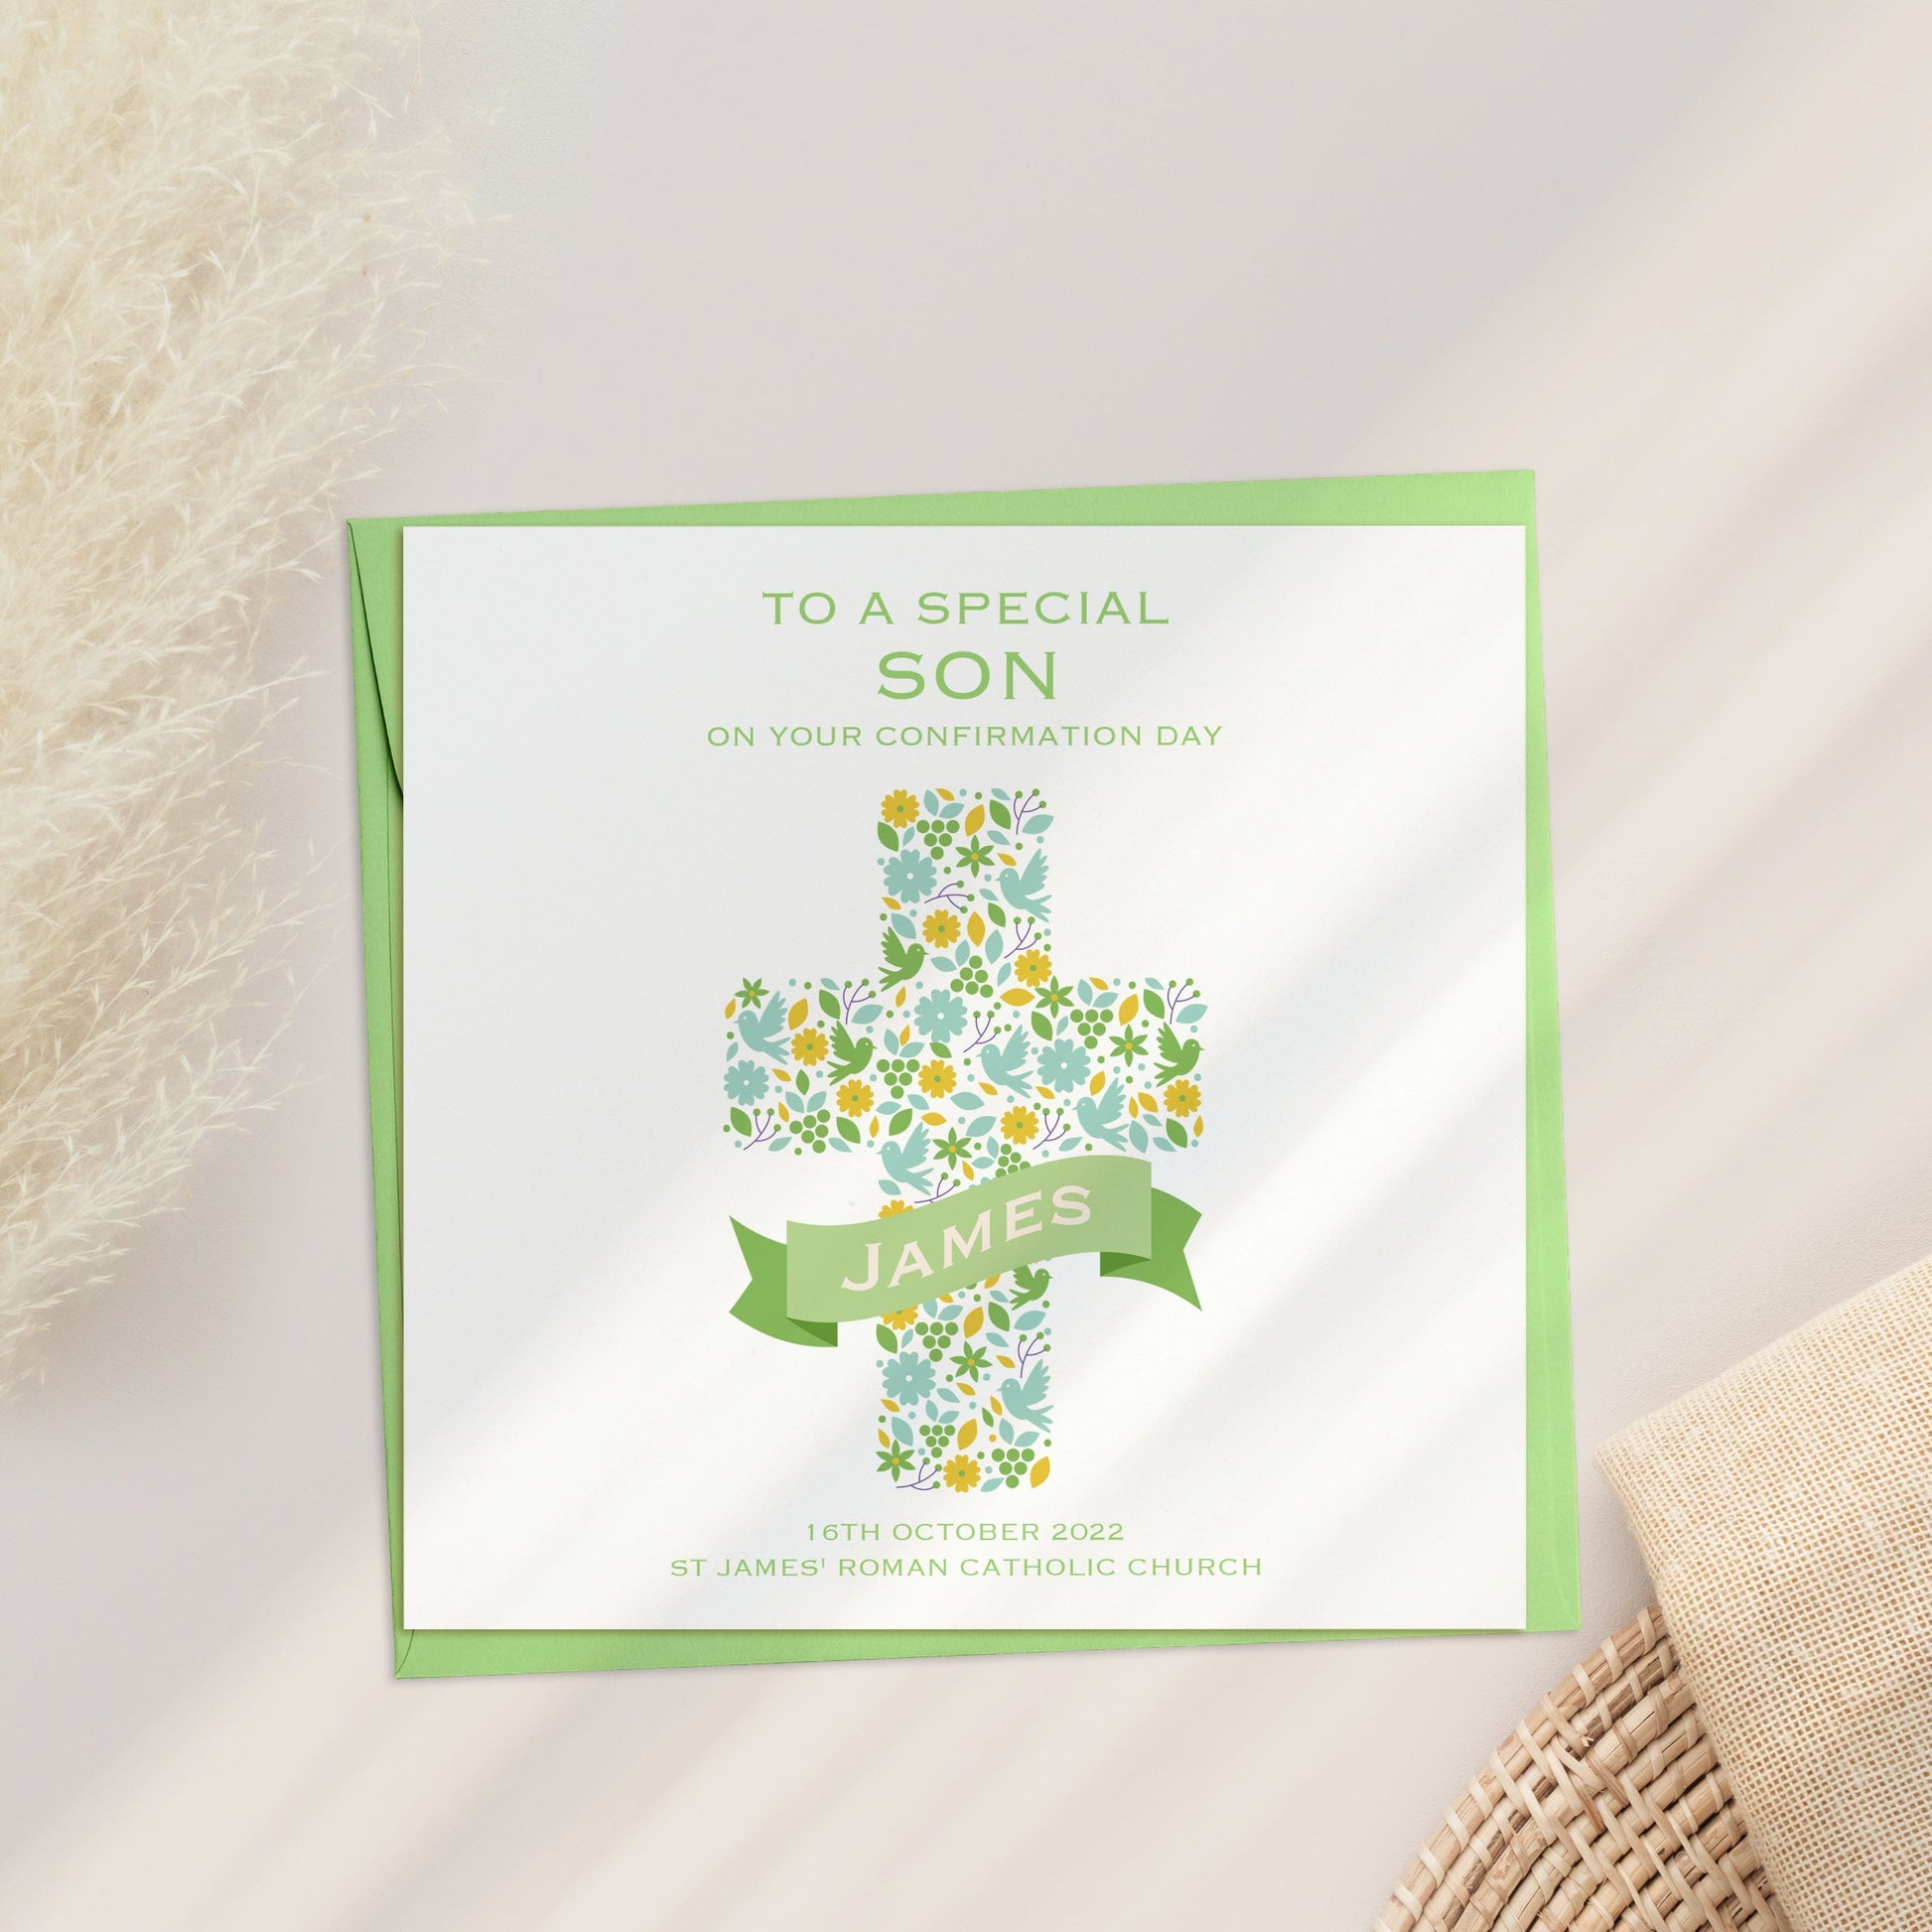 Personalised Confirmation Card for Nephew, Confirmation Card with Cross, Confirmation Day Card for Grandson, Confirmation Card for Son